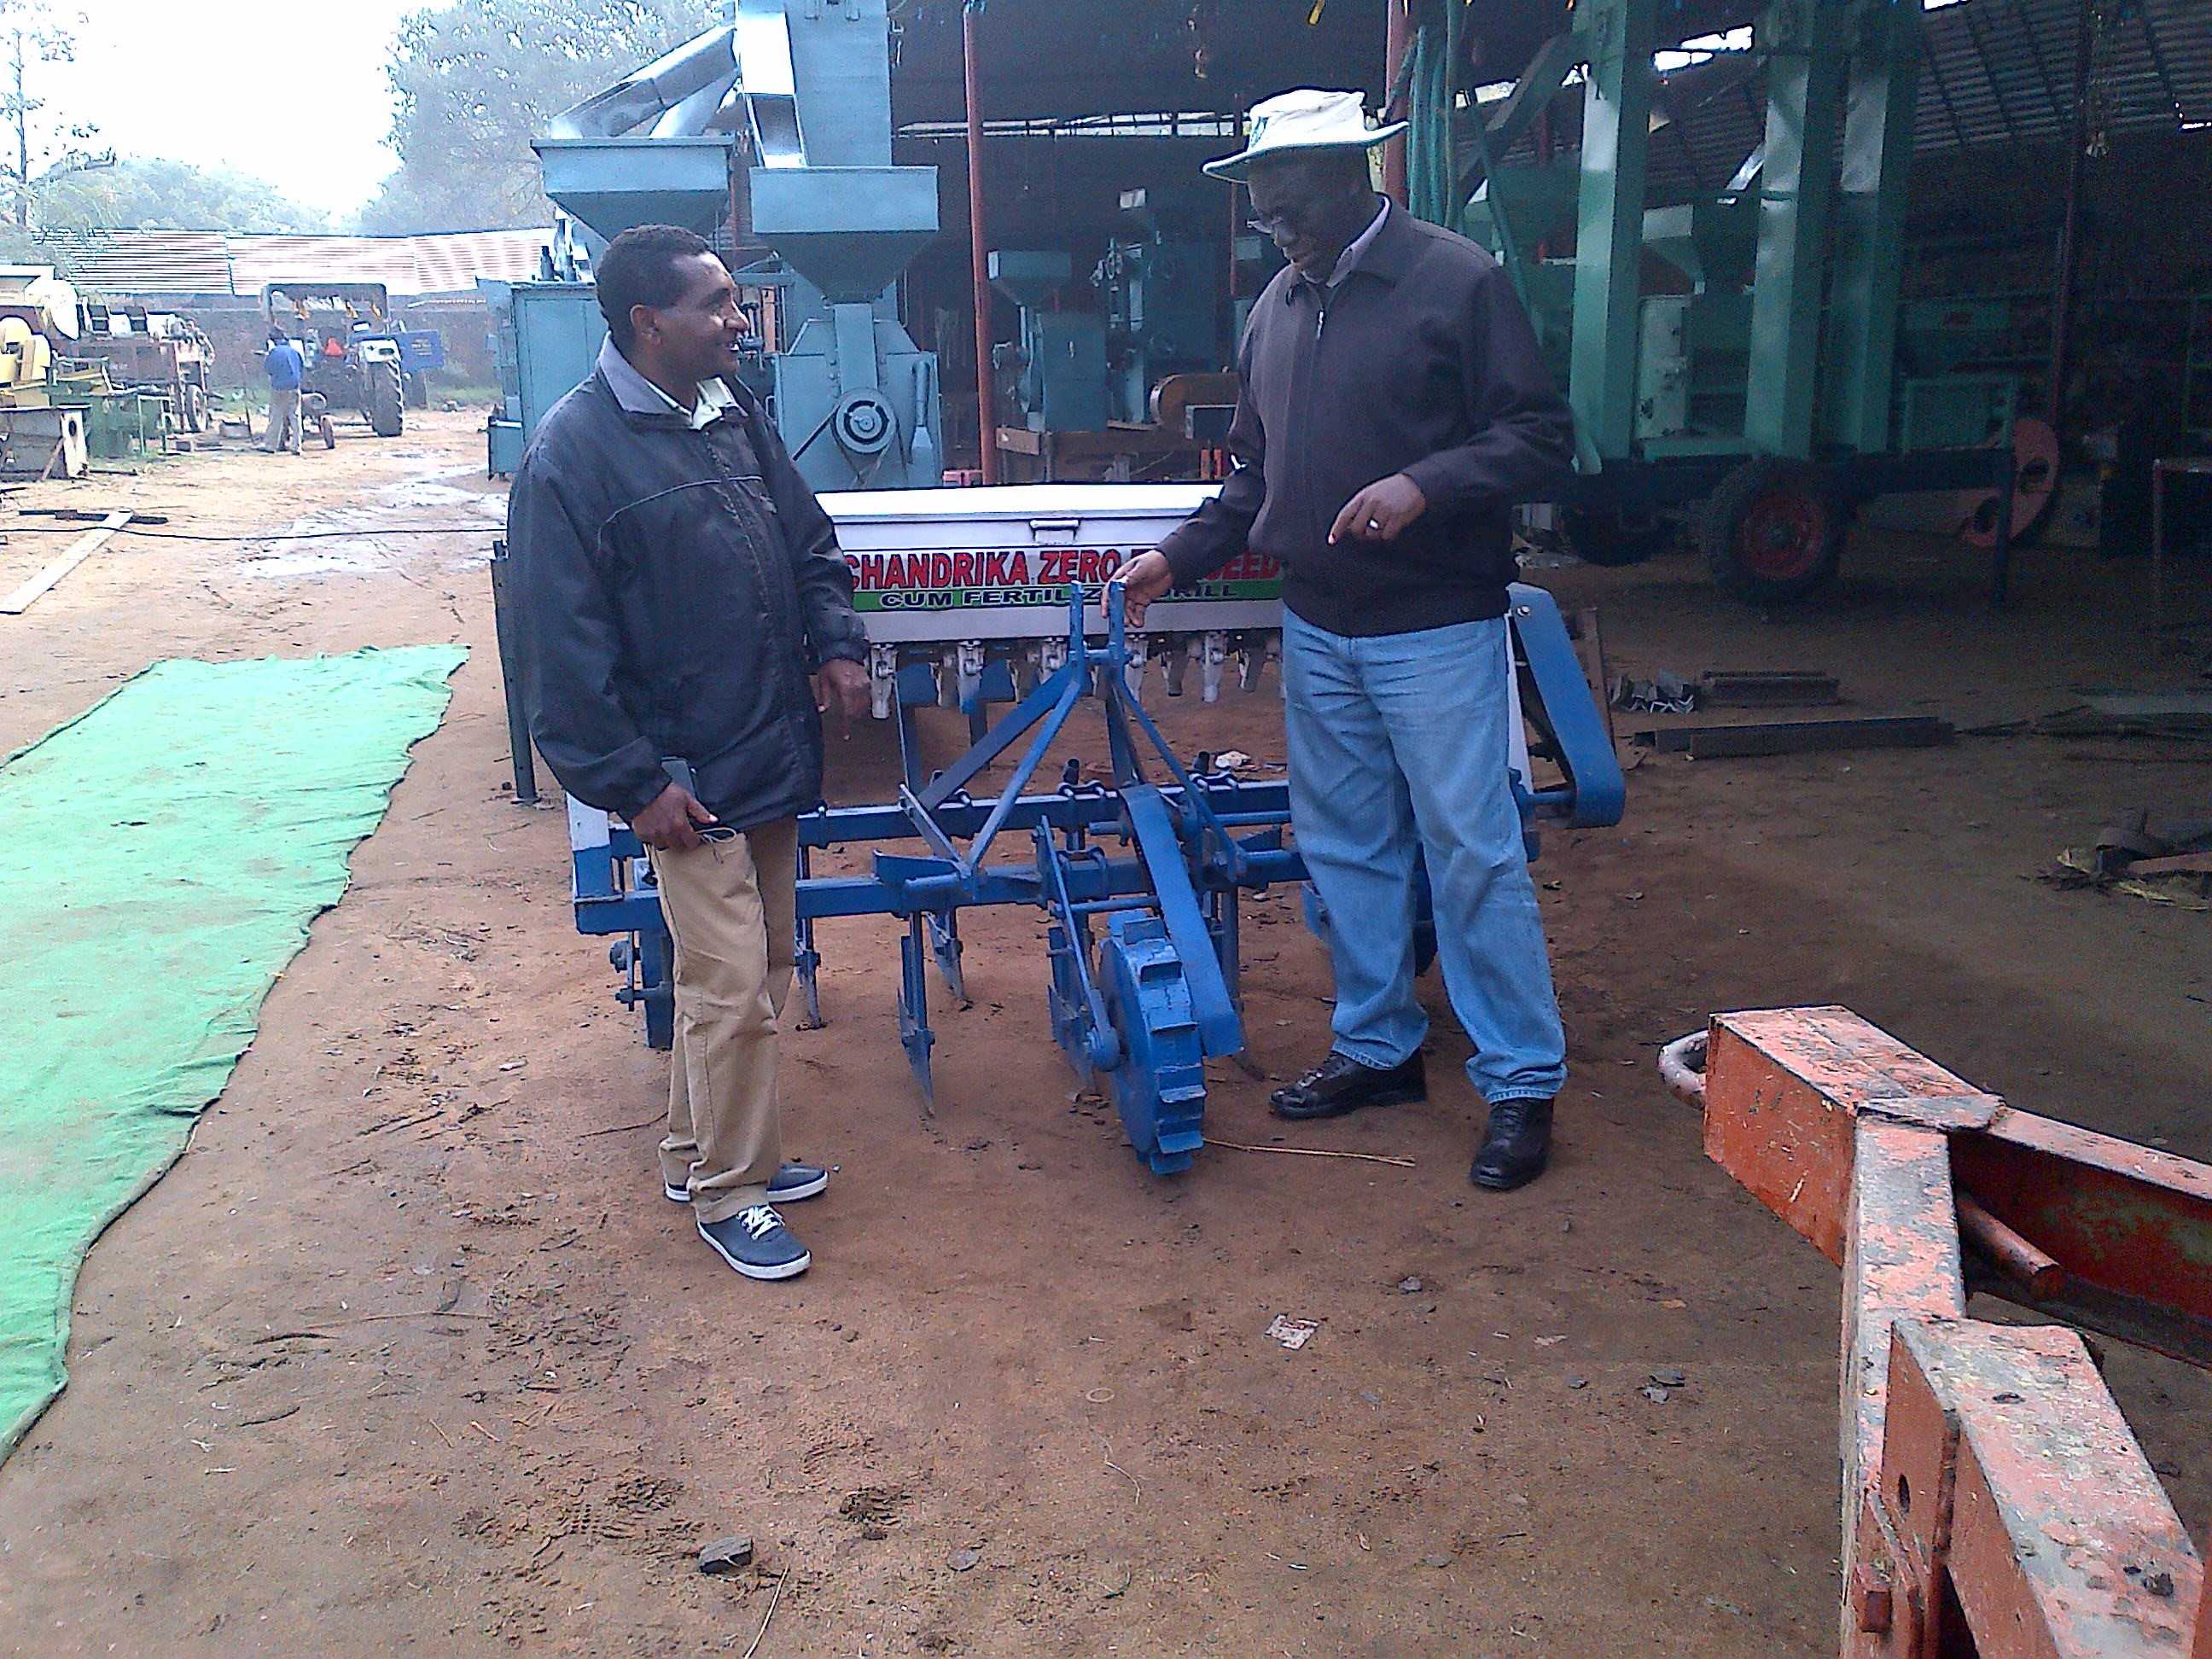 Africa RISING scientists Mateete Bekunda from IITA (right) and Kindu Mekonnen from ILRI (left) look at a mechanical seeder manufactured for use by small-scale farmers in India. The mechanical seeder is manufactured through a public-private partnership between the Cereal Systems Initiative for South Asia (CSISA) and the private sector.